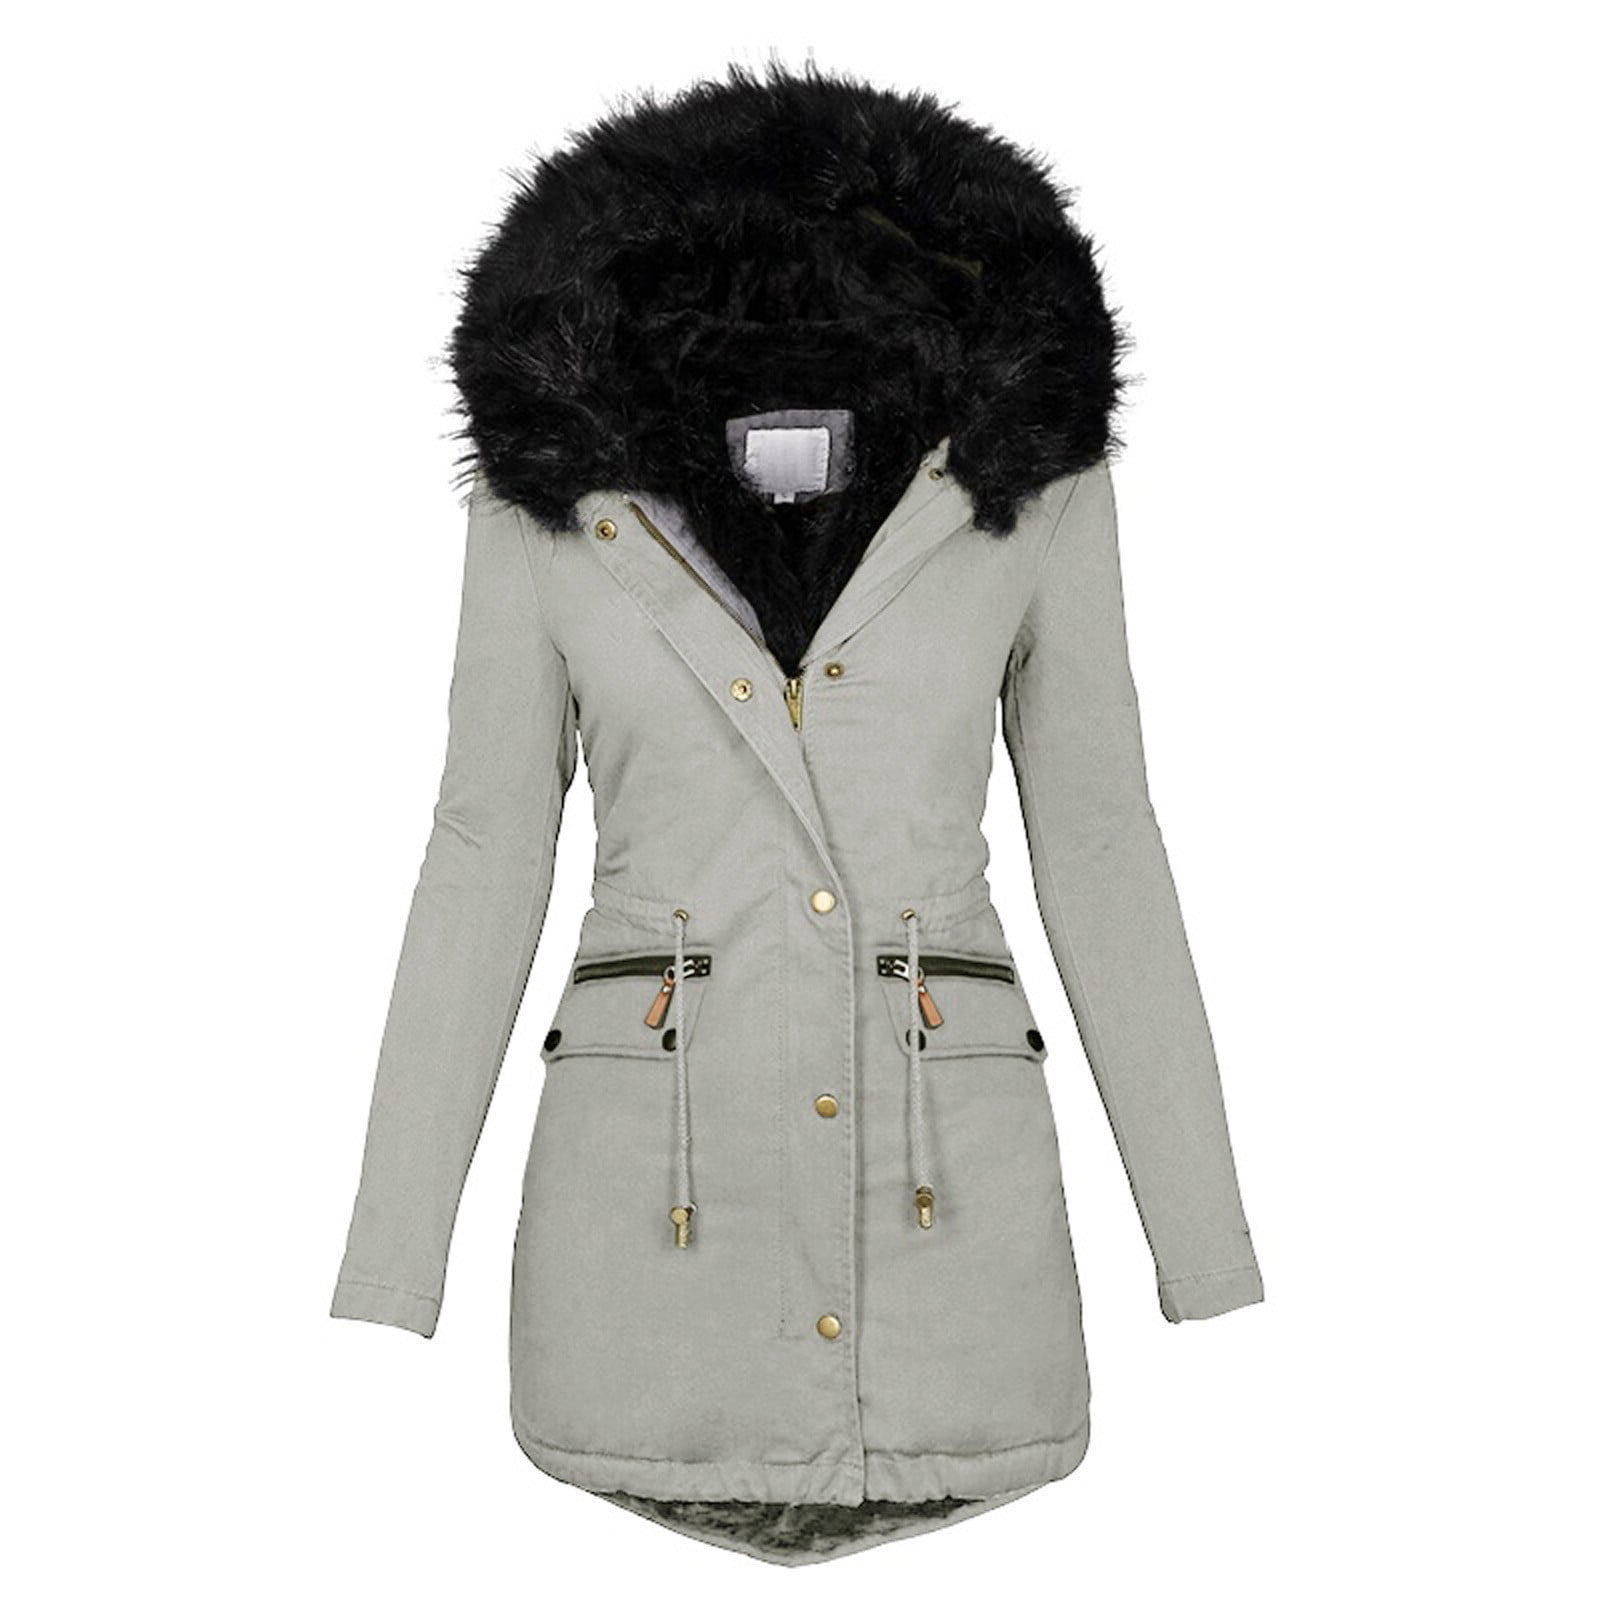 Abollria Womens Thickened Parka Coat Winter Down Jacket with Hood 